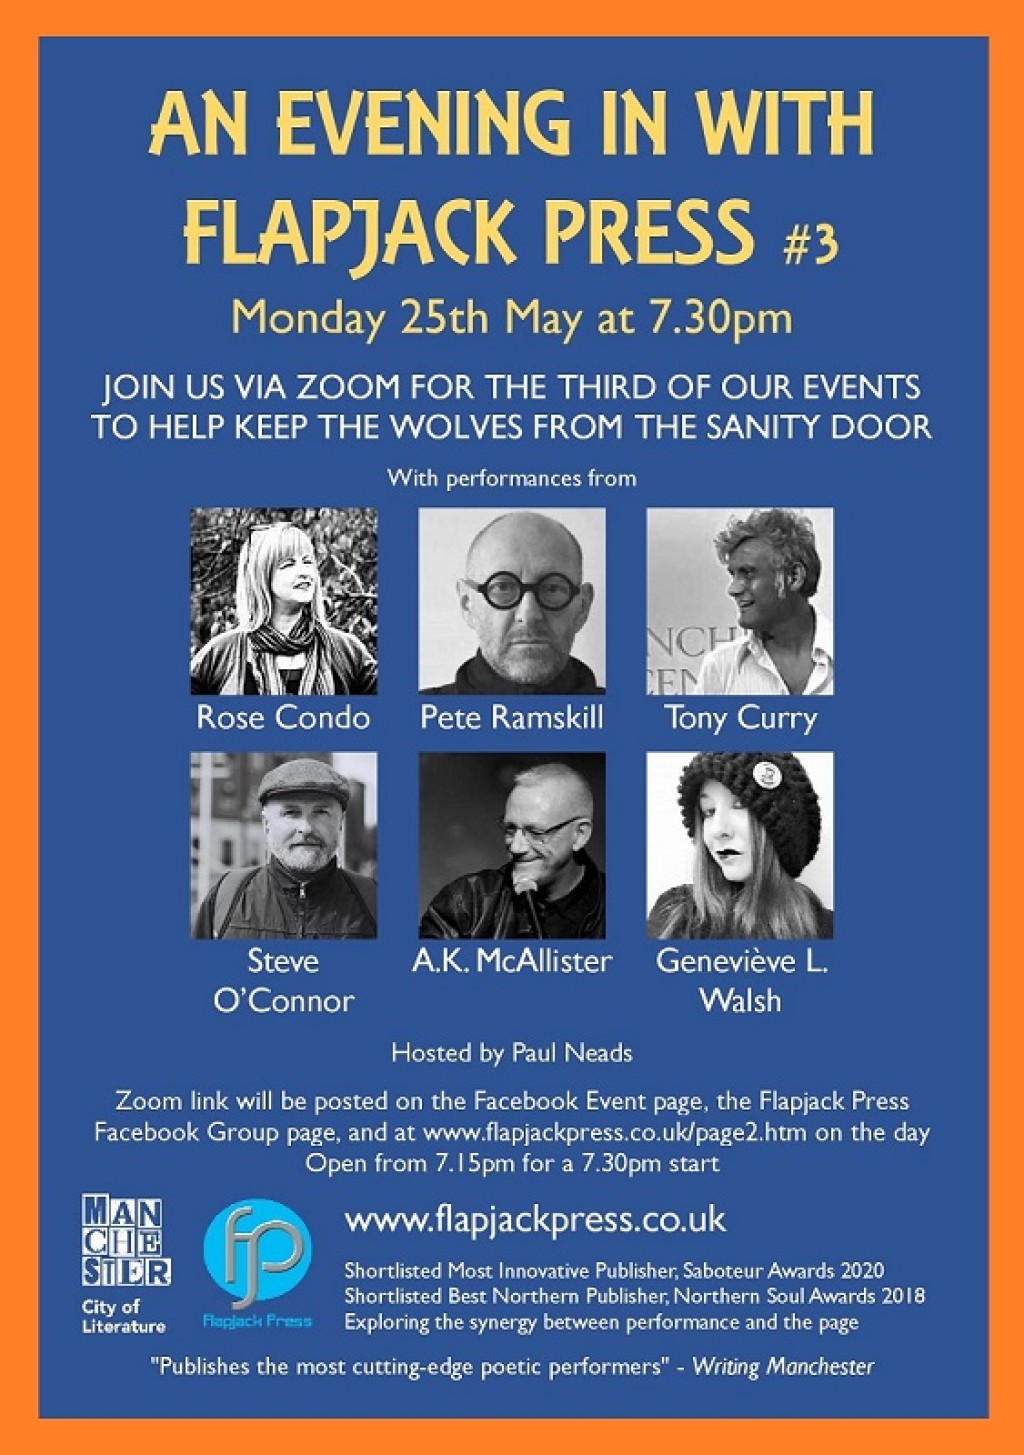 An Evening In with Flapjack Press #3